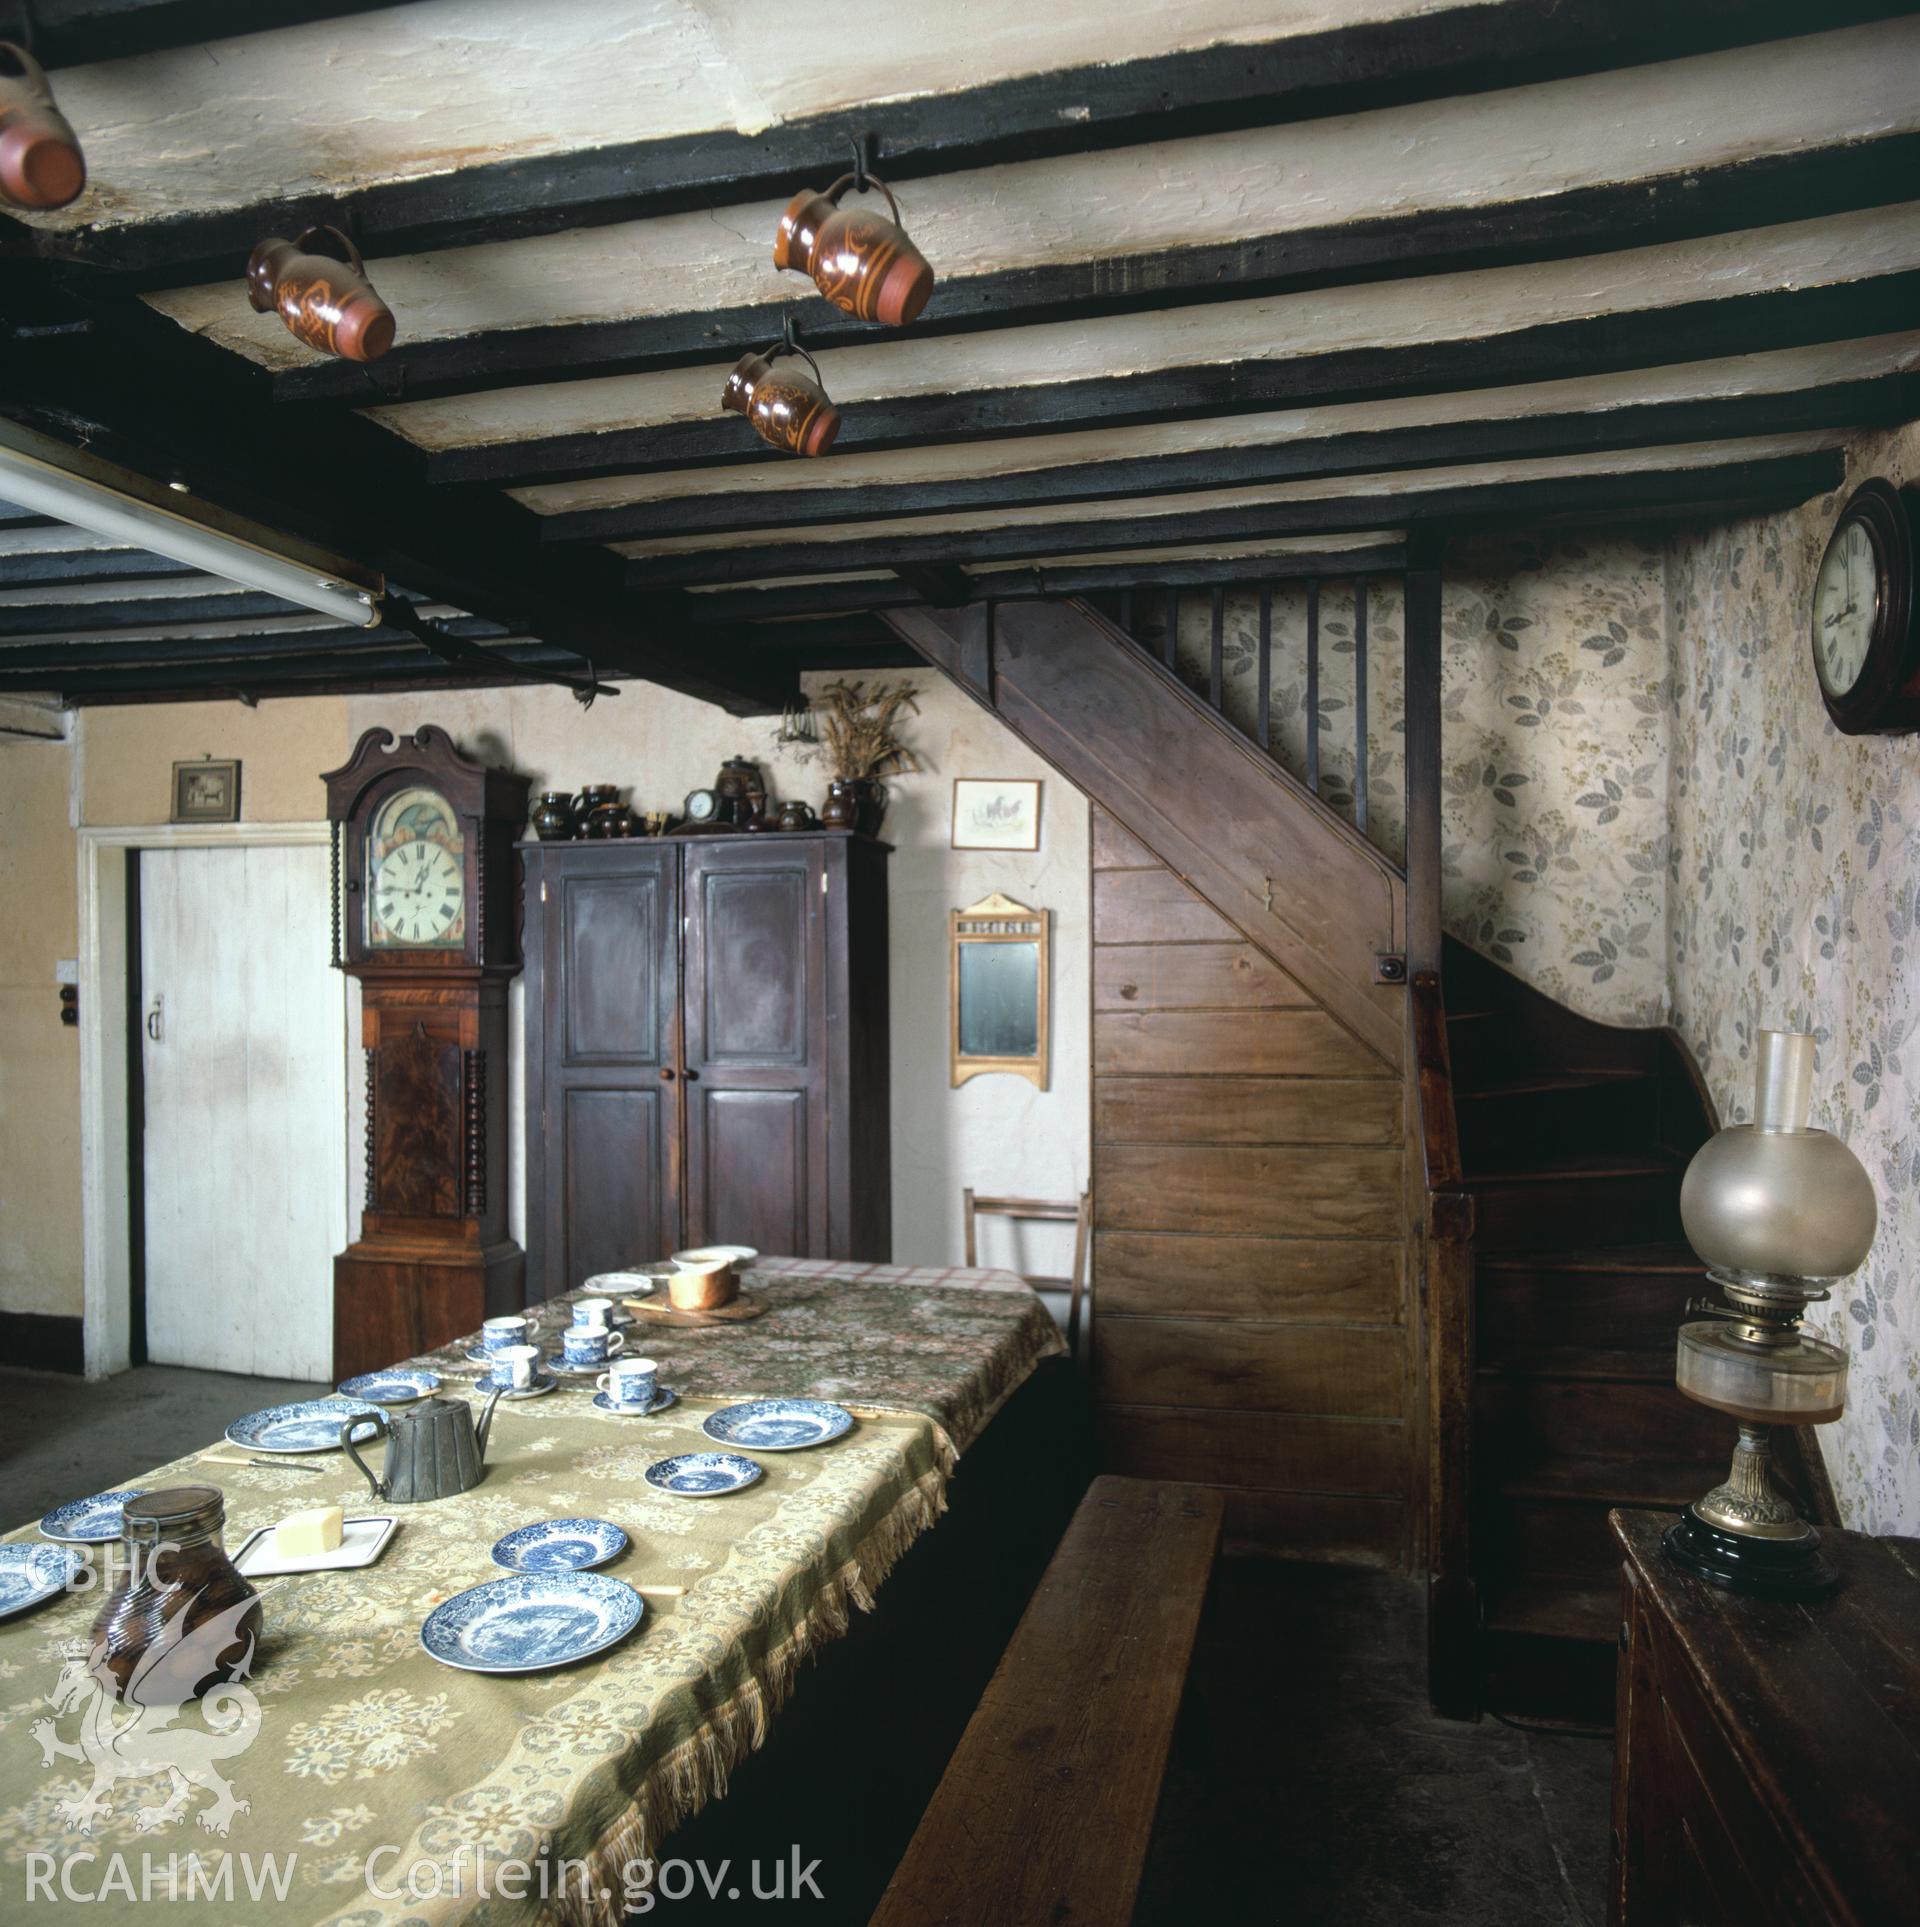 RCAHMW colour transparency showing the staircase in the kitchen at Glan Ithon Farmhouse, taken by RCAHMW, undated.